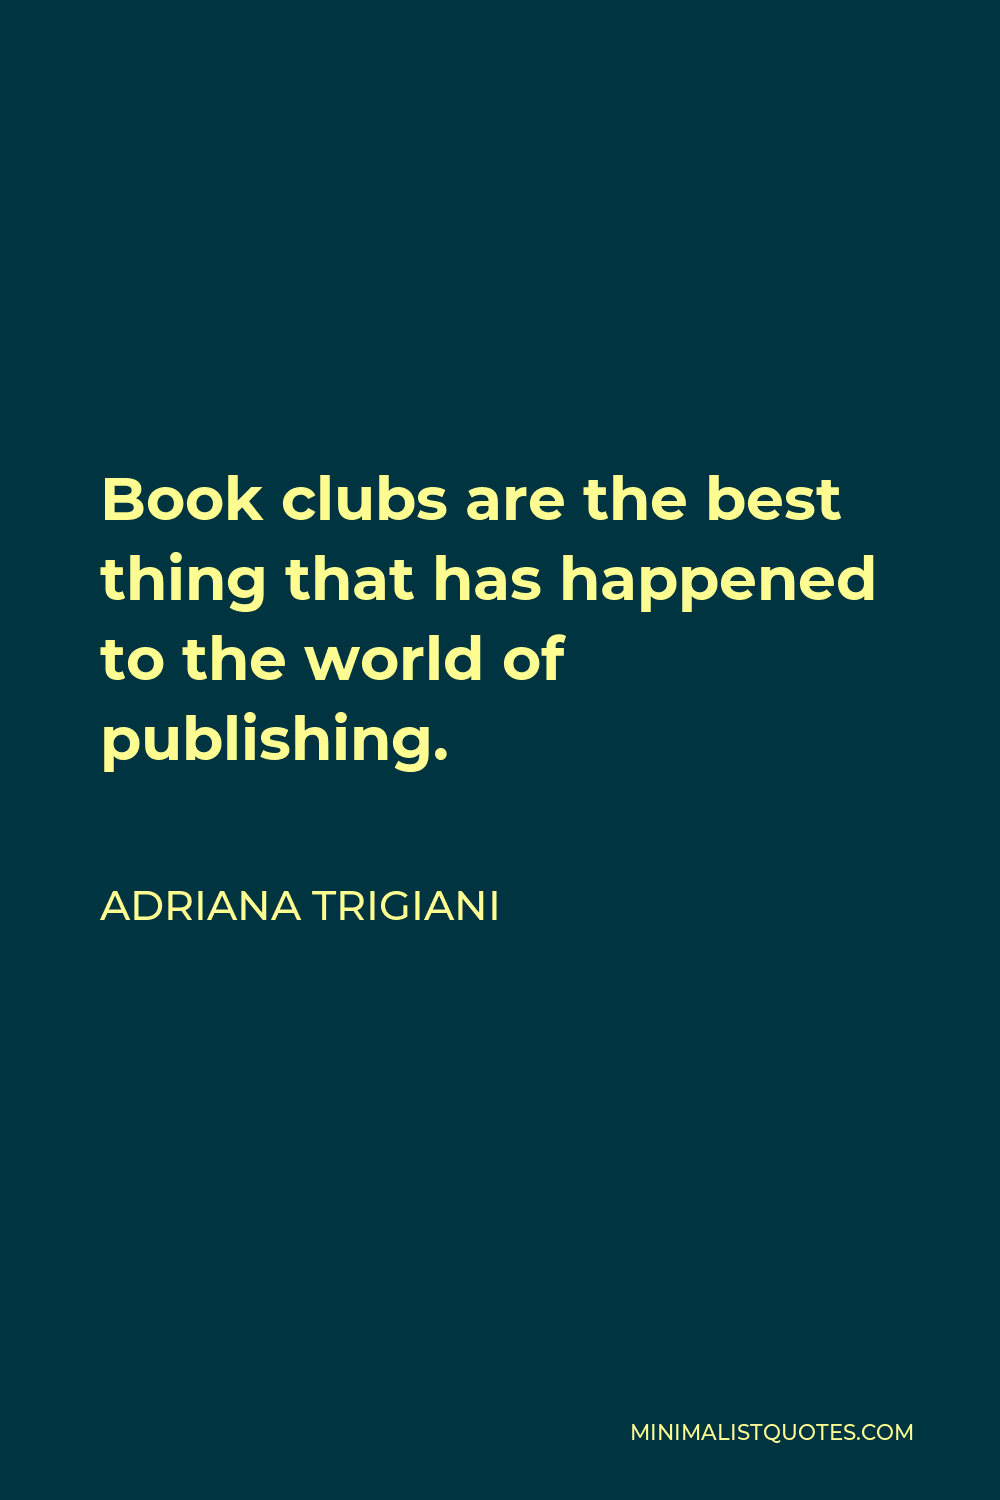 Adriana Trigiani Quote - Book clubs are the best thing that has happened to the world of publishing.